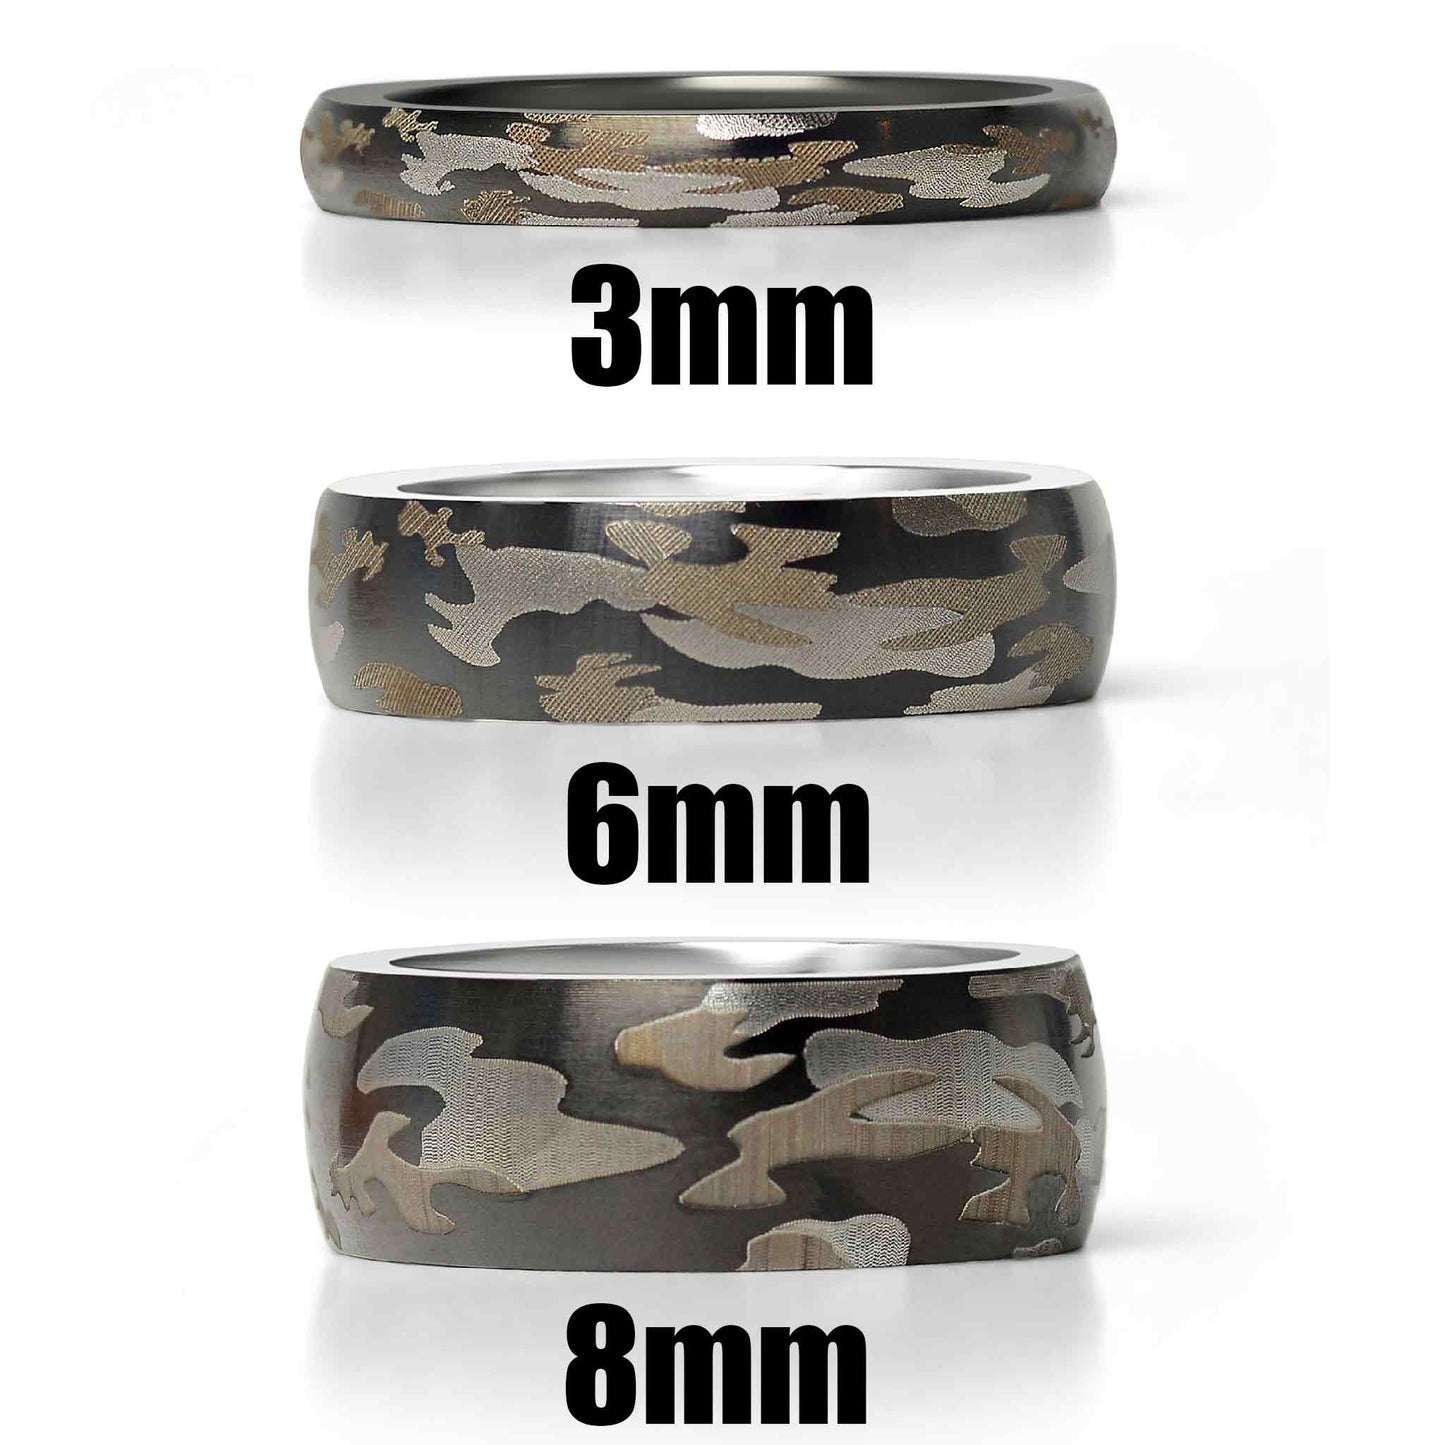 Camouflage Stainless Steel Hunter's Ring